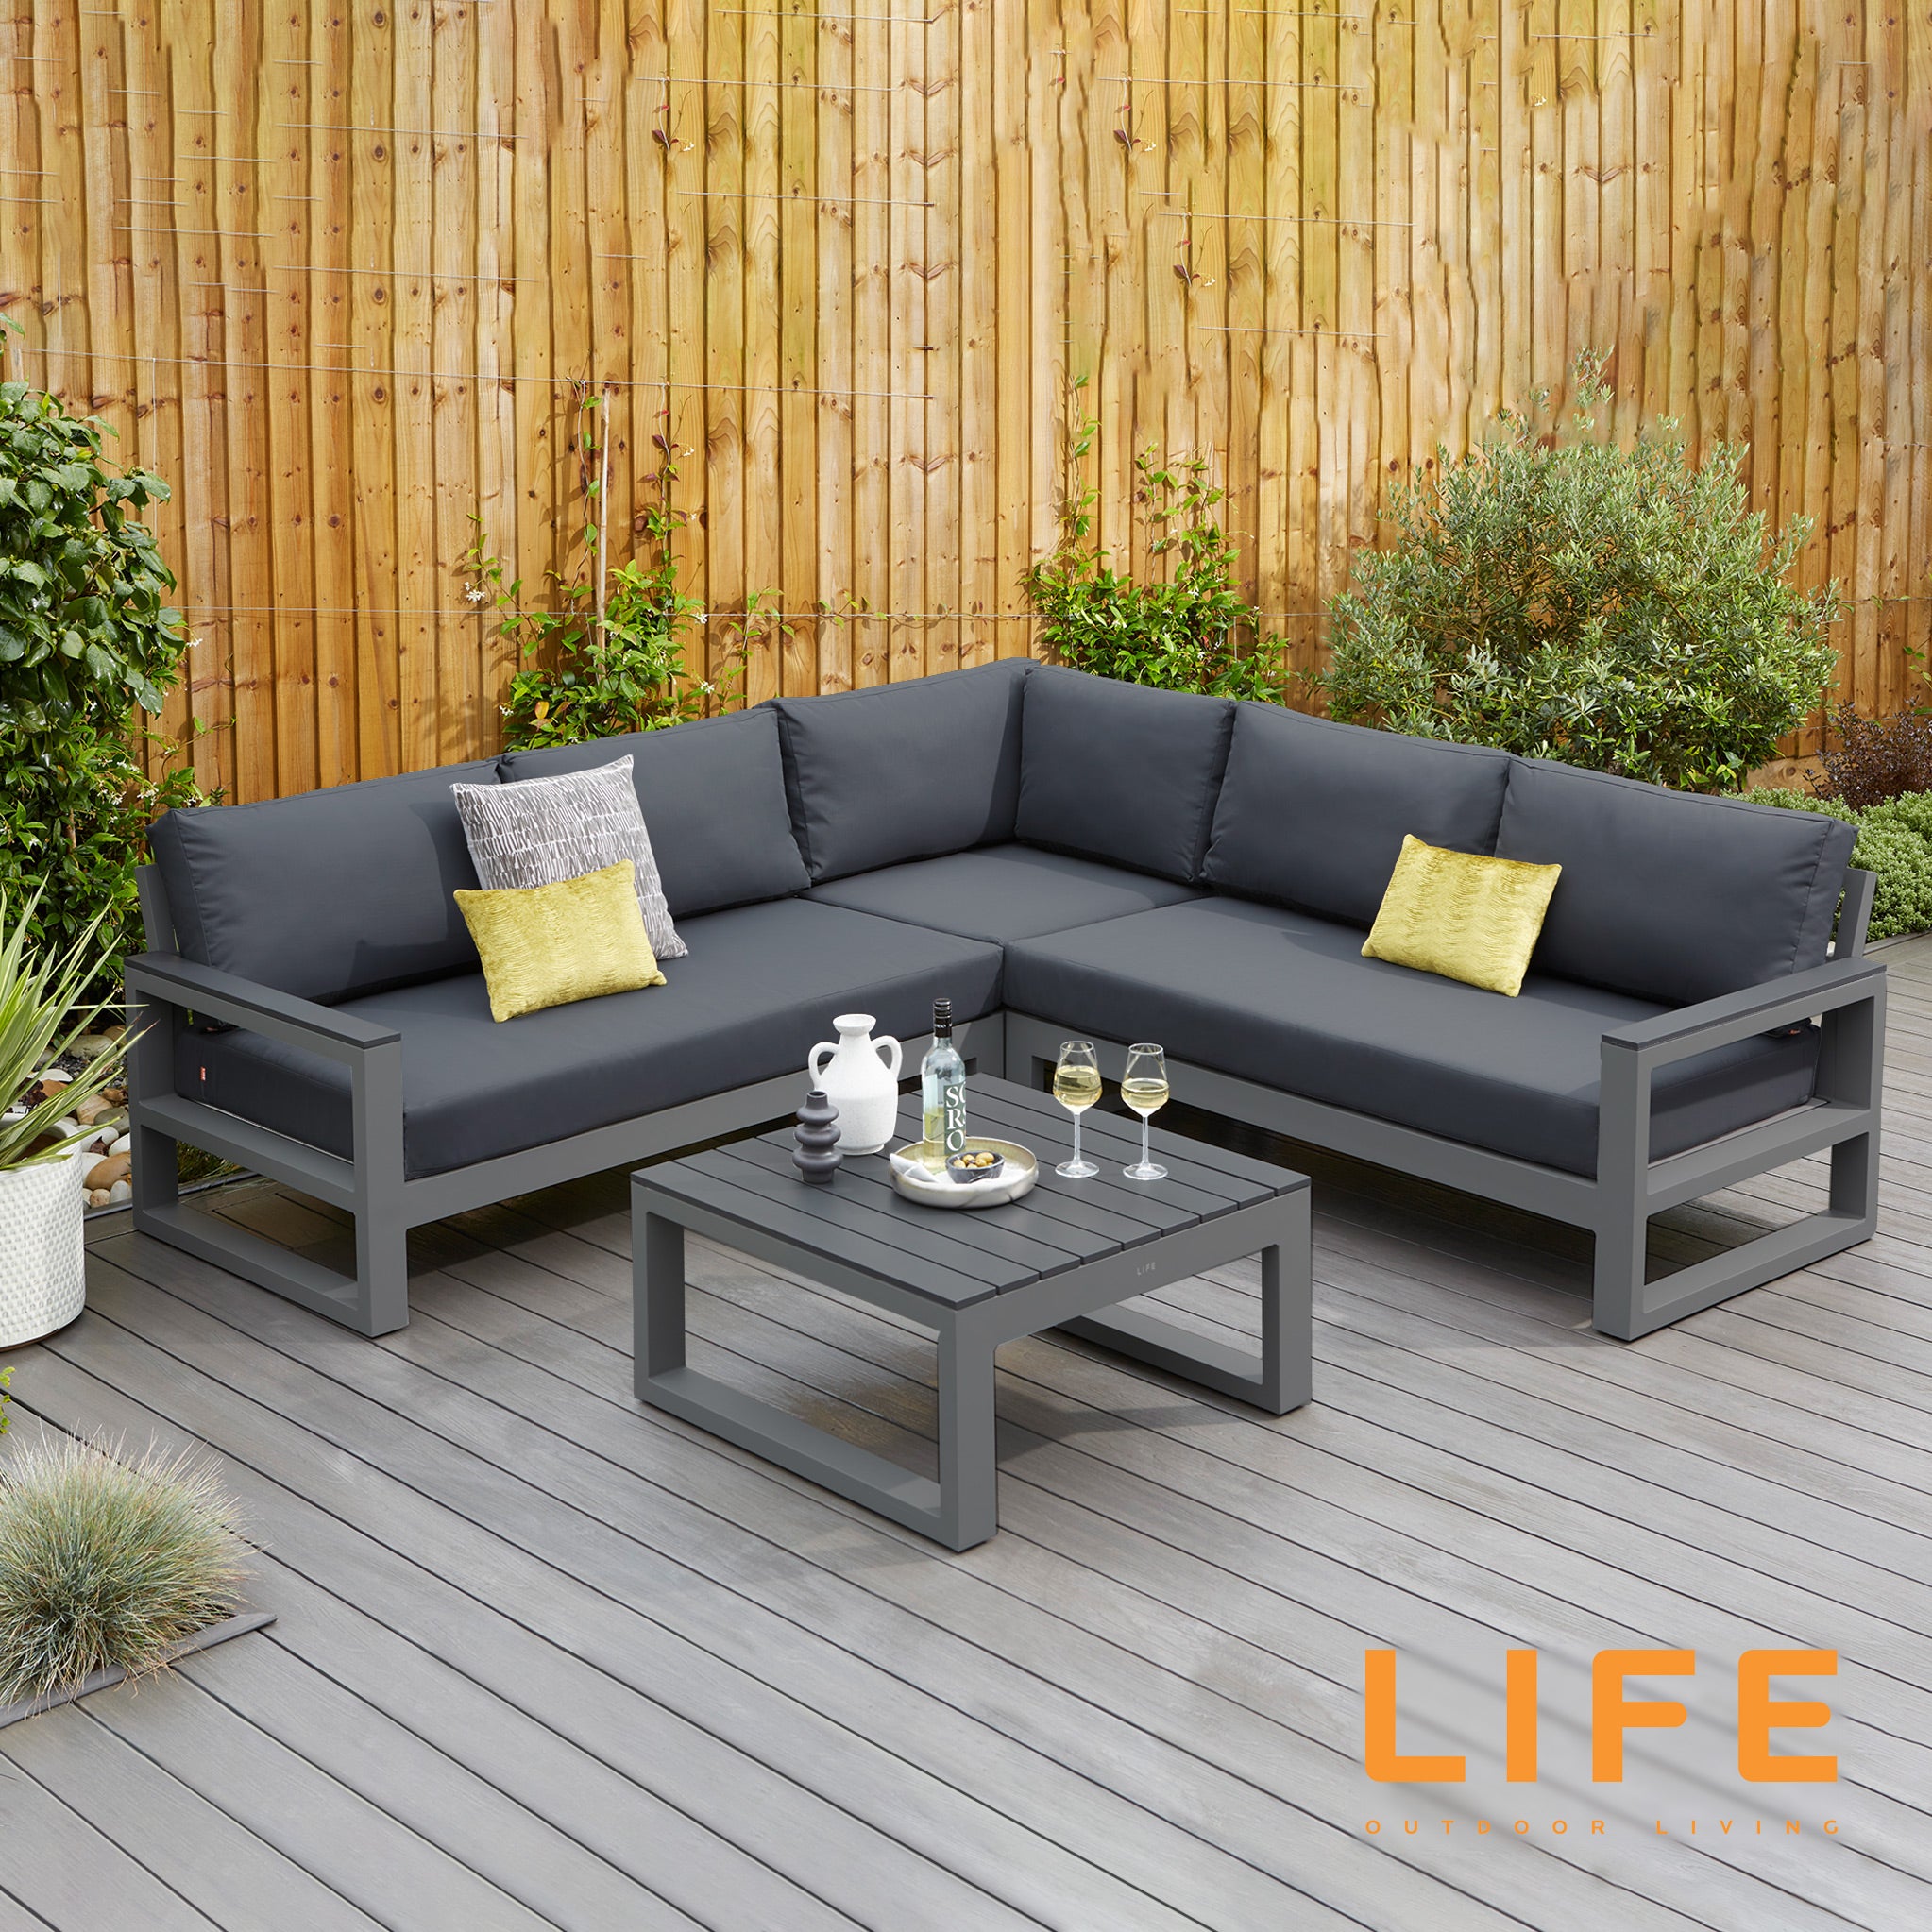 Life Outdoor Living Mallorca Corner Lounge Set With Square Coffeee Table